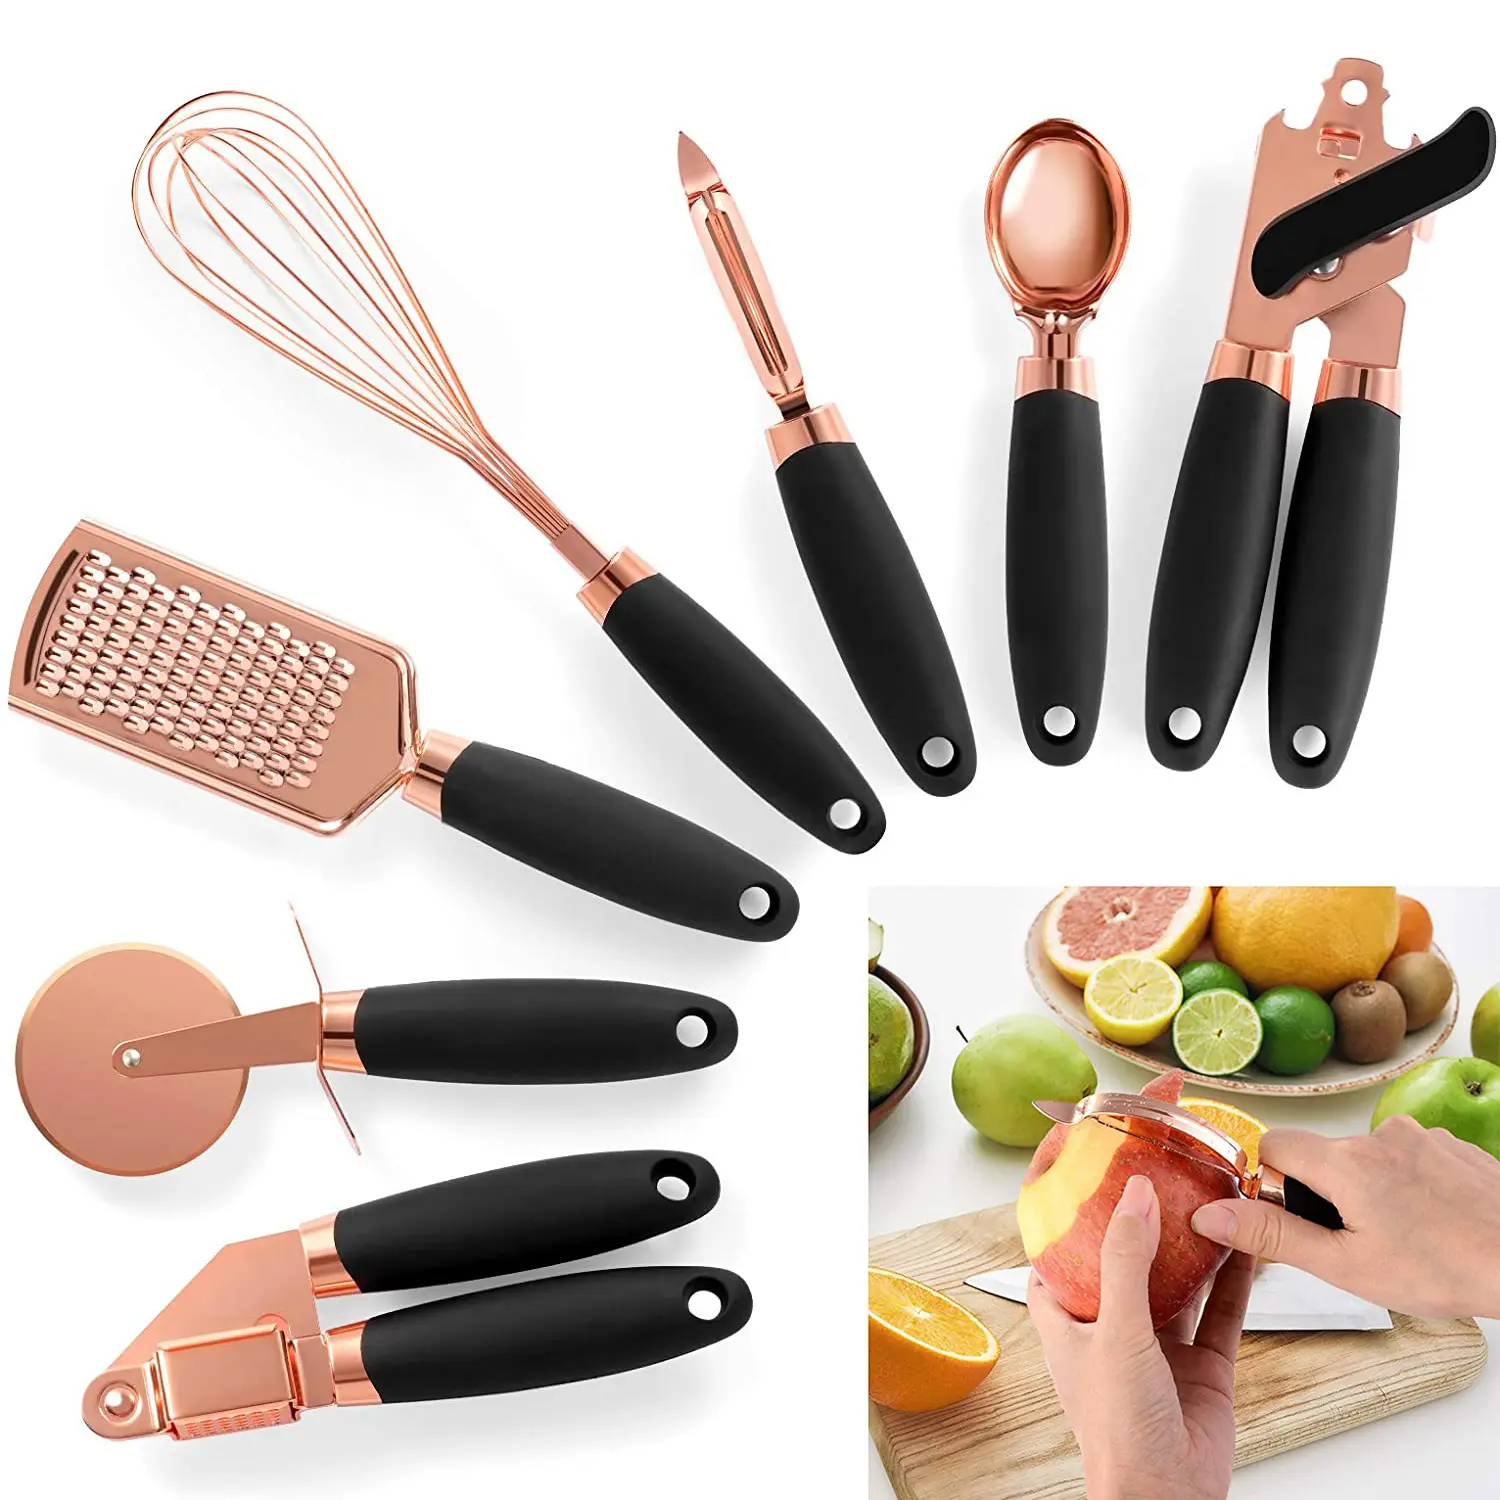 New Food Grade Plastic, utensilios 7pcs Home Copper Utensils Kitchen Tools And Smart Gadget Stainless Steel Set 2021/